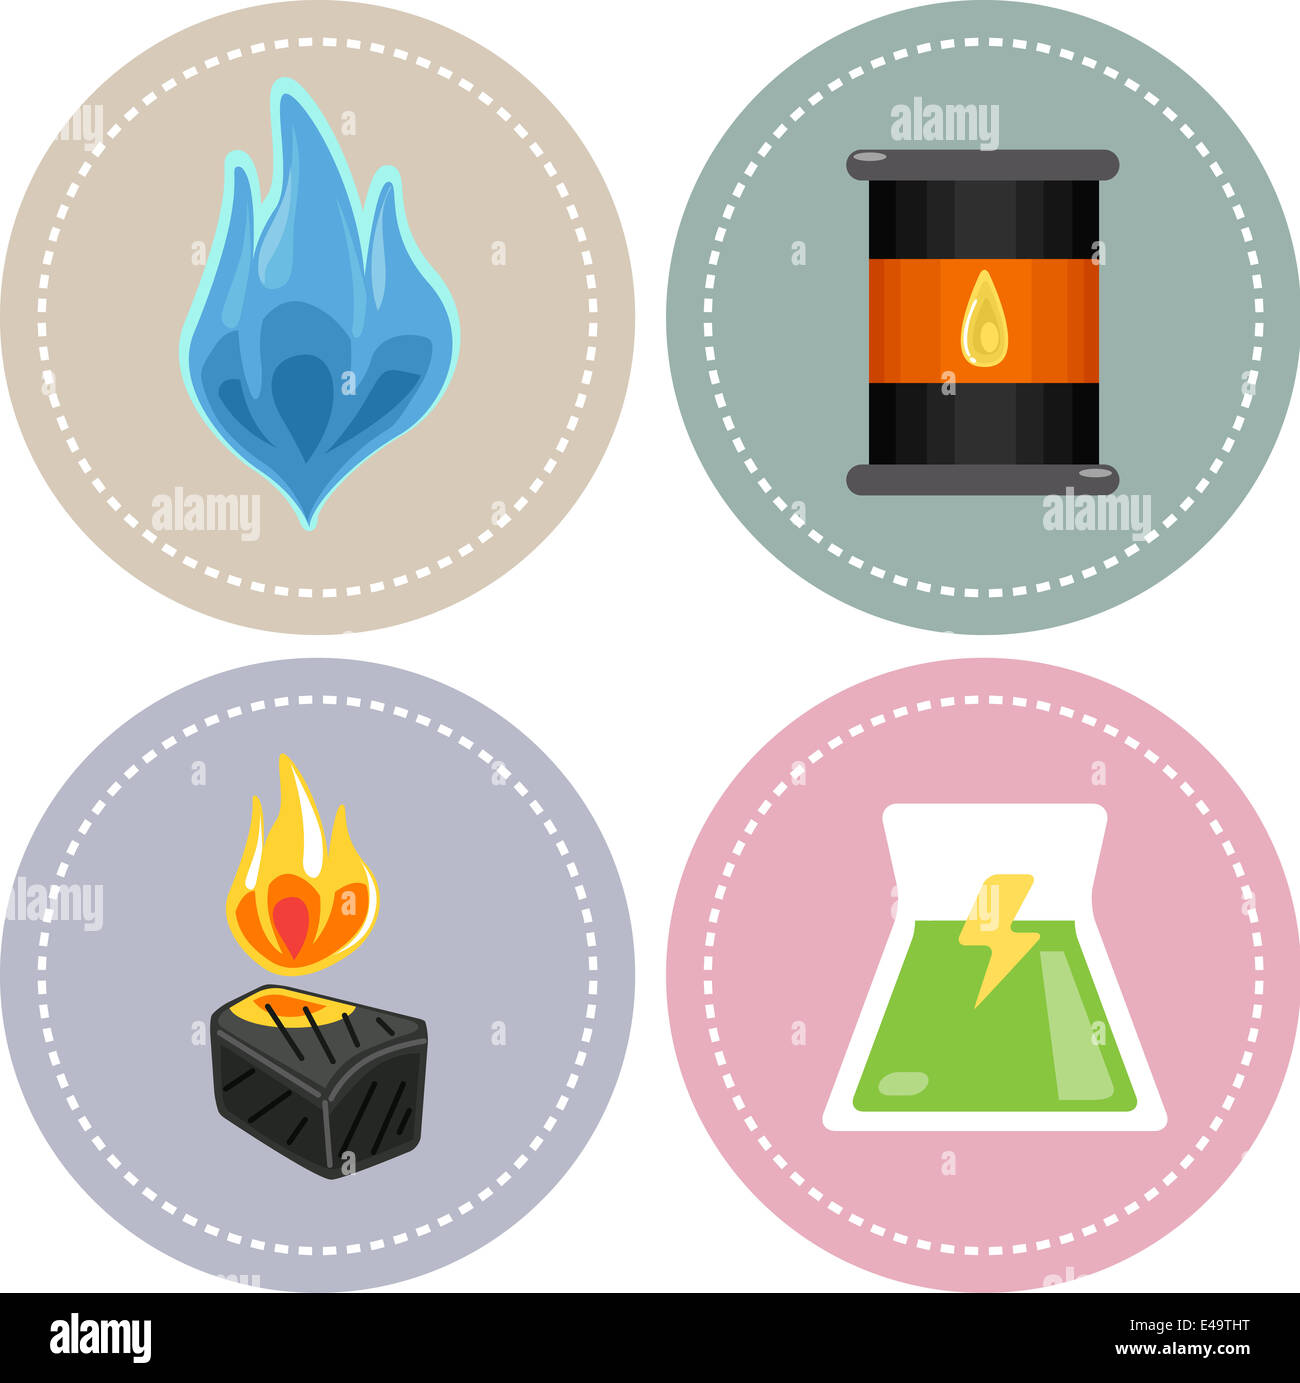 Icon Illustration Featuring Sources of Non-renewable Energy (natural gas, oil, coal and nuclear) Stock Photo